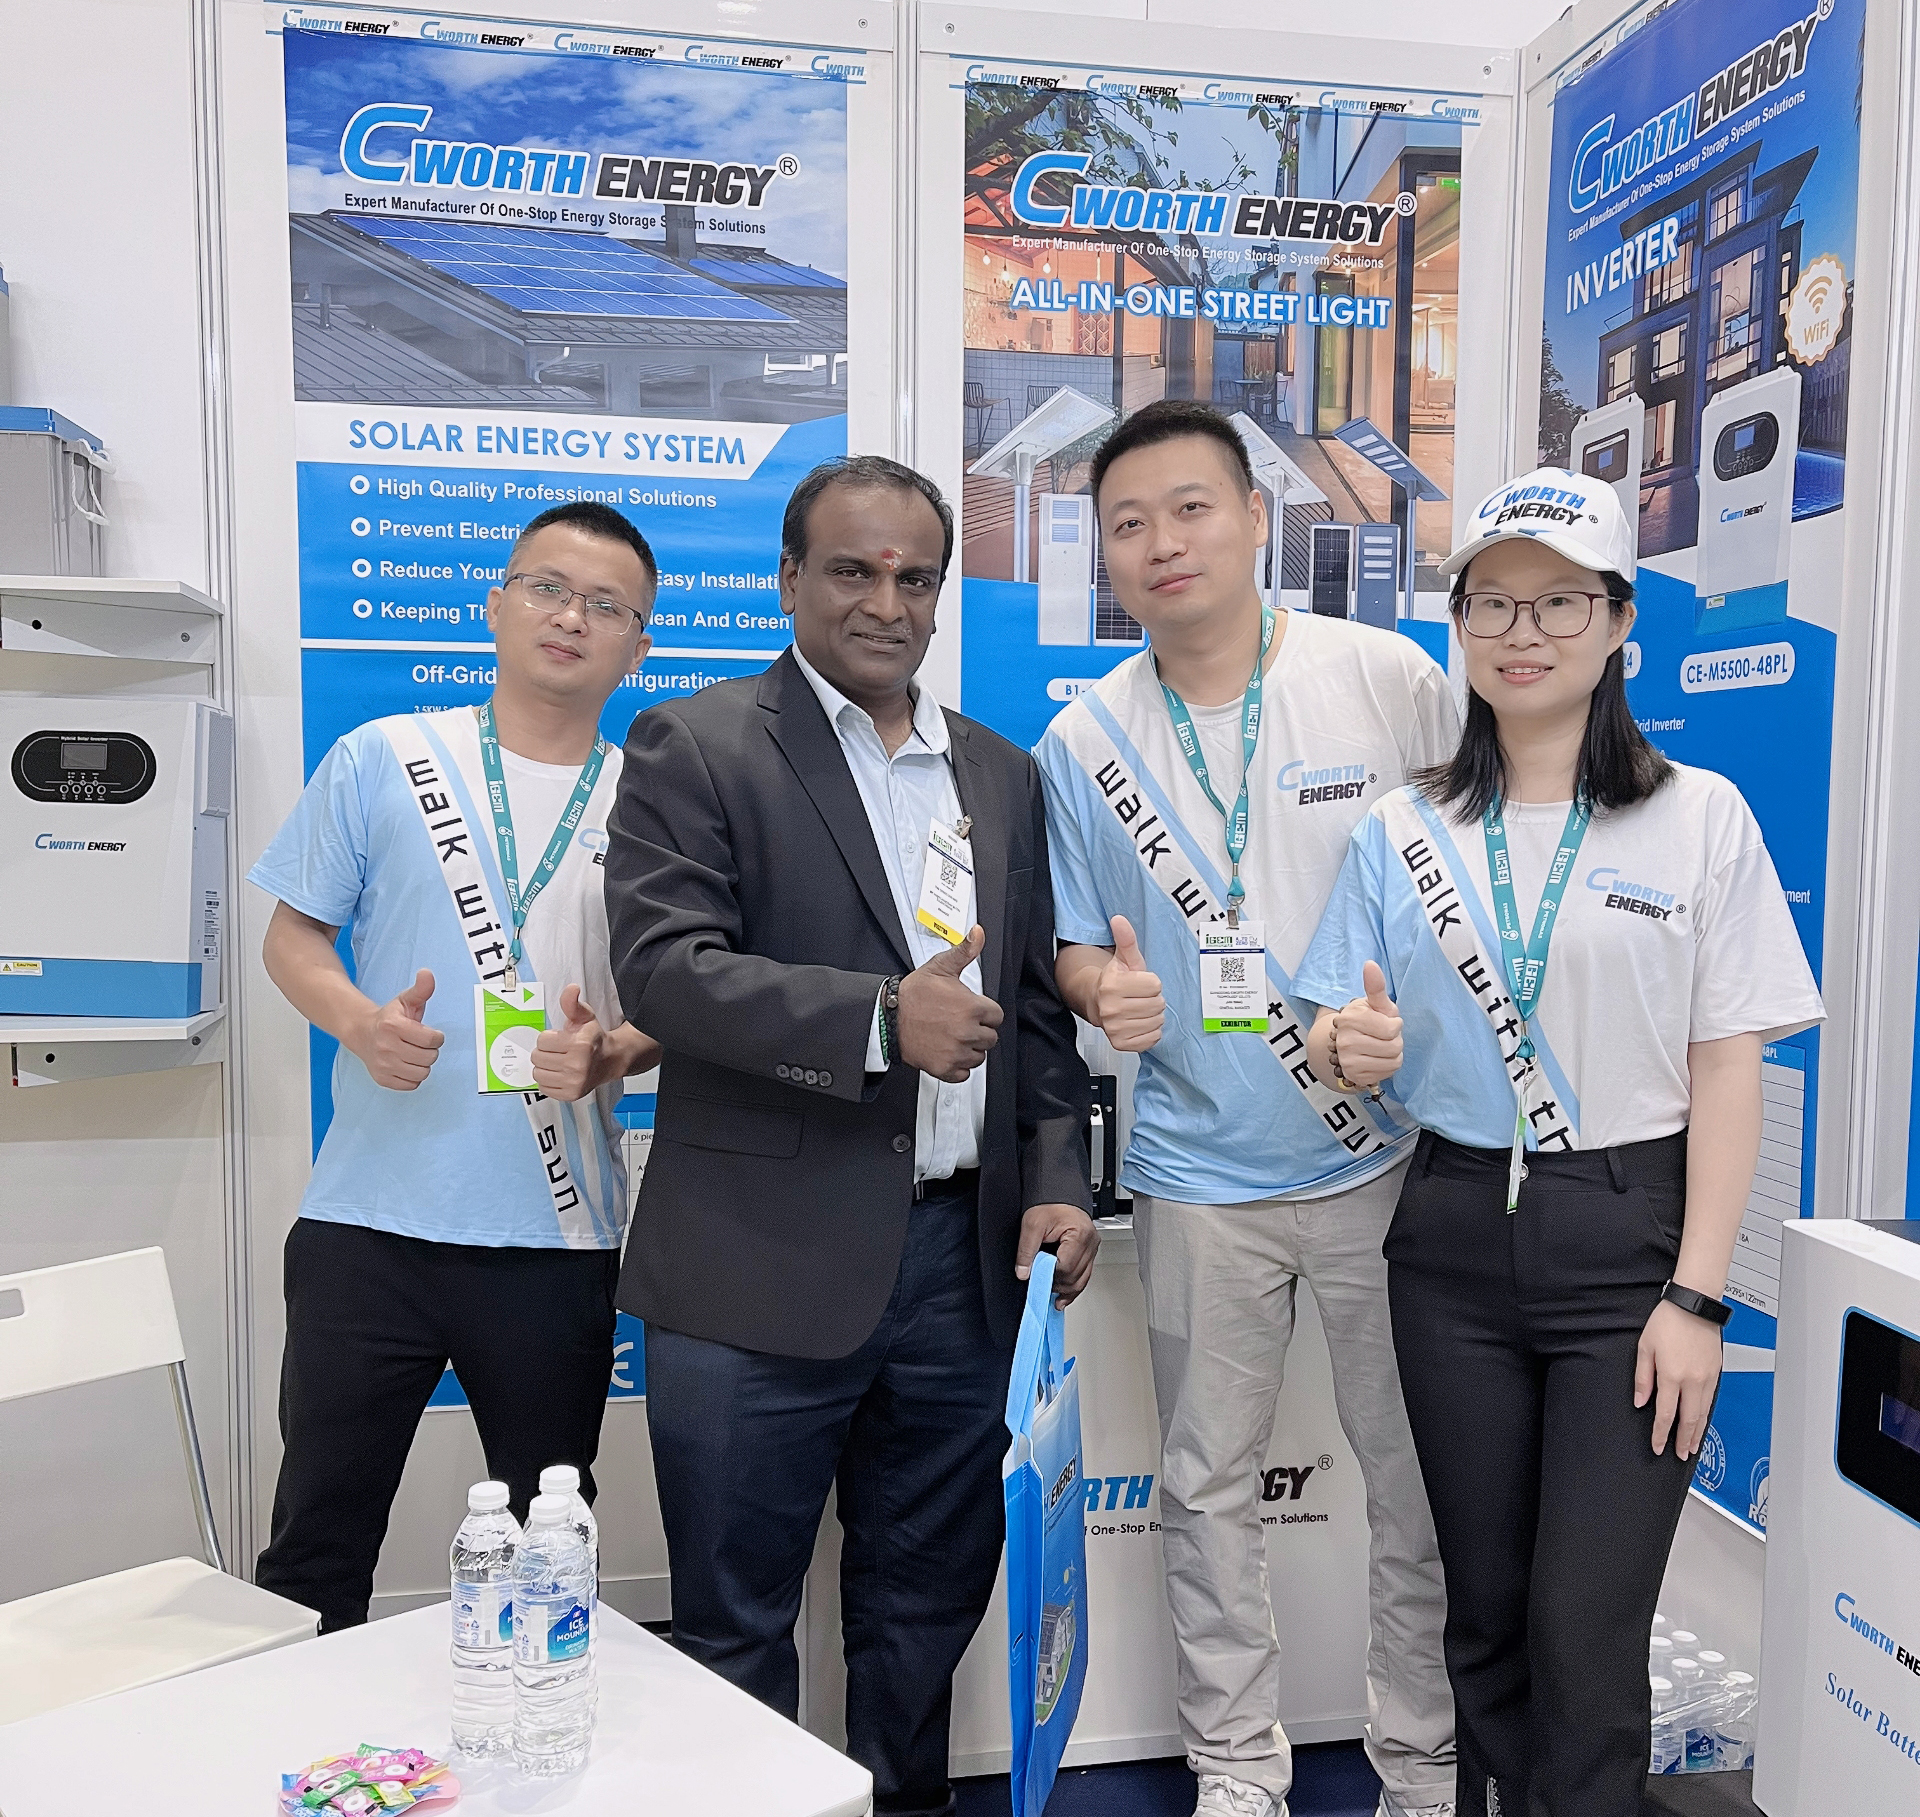 Cworth energy had joined the International Greentech & Eco Products Exhibition & Conference Malaysia (IGEM) 2023